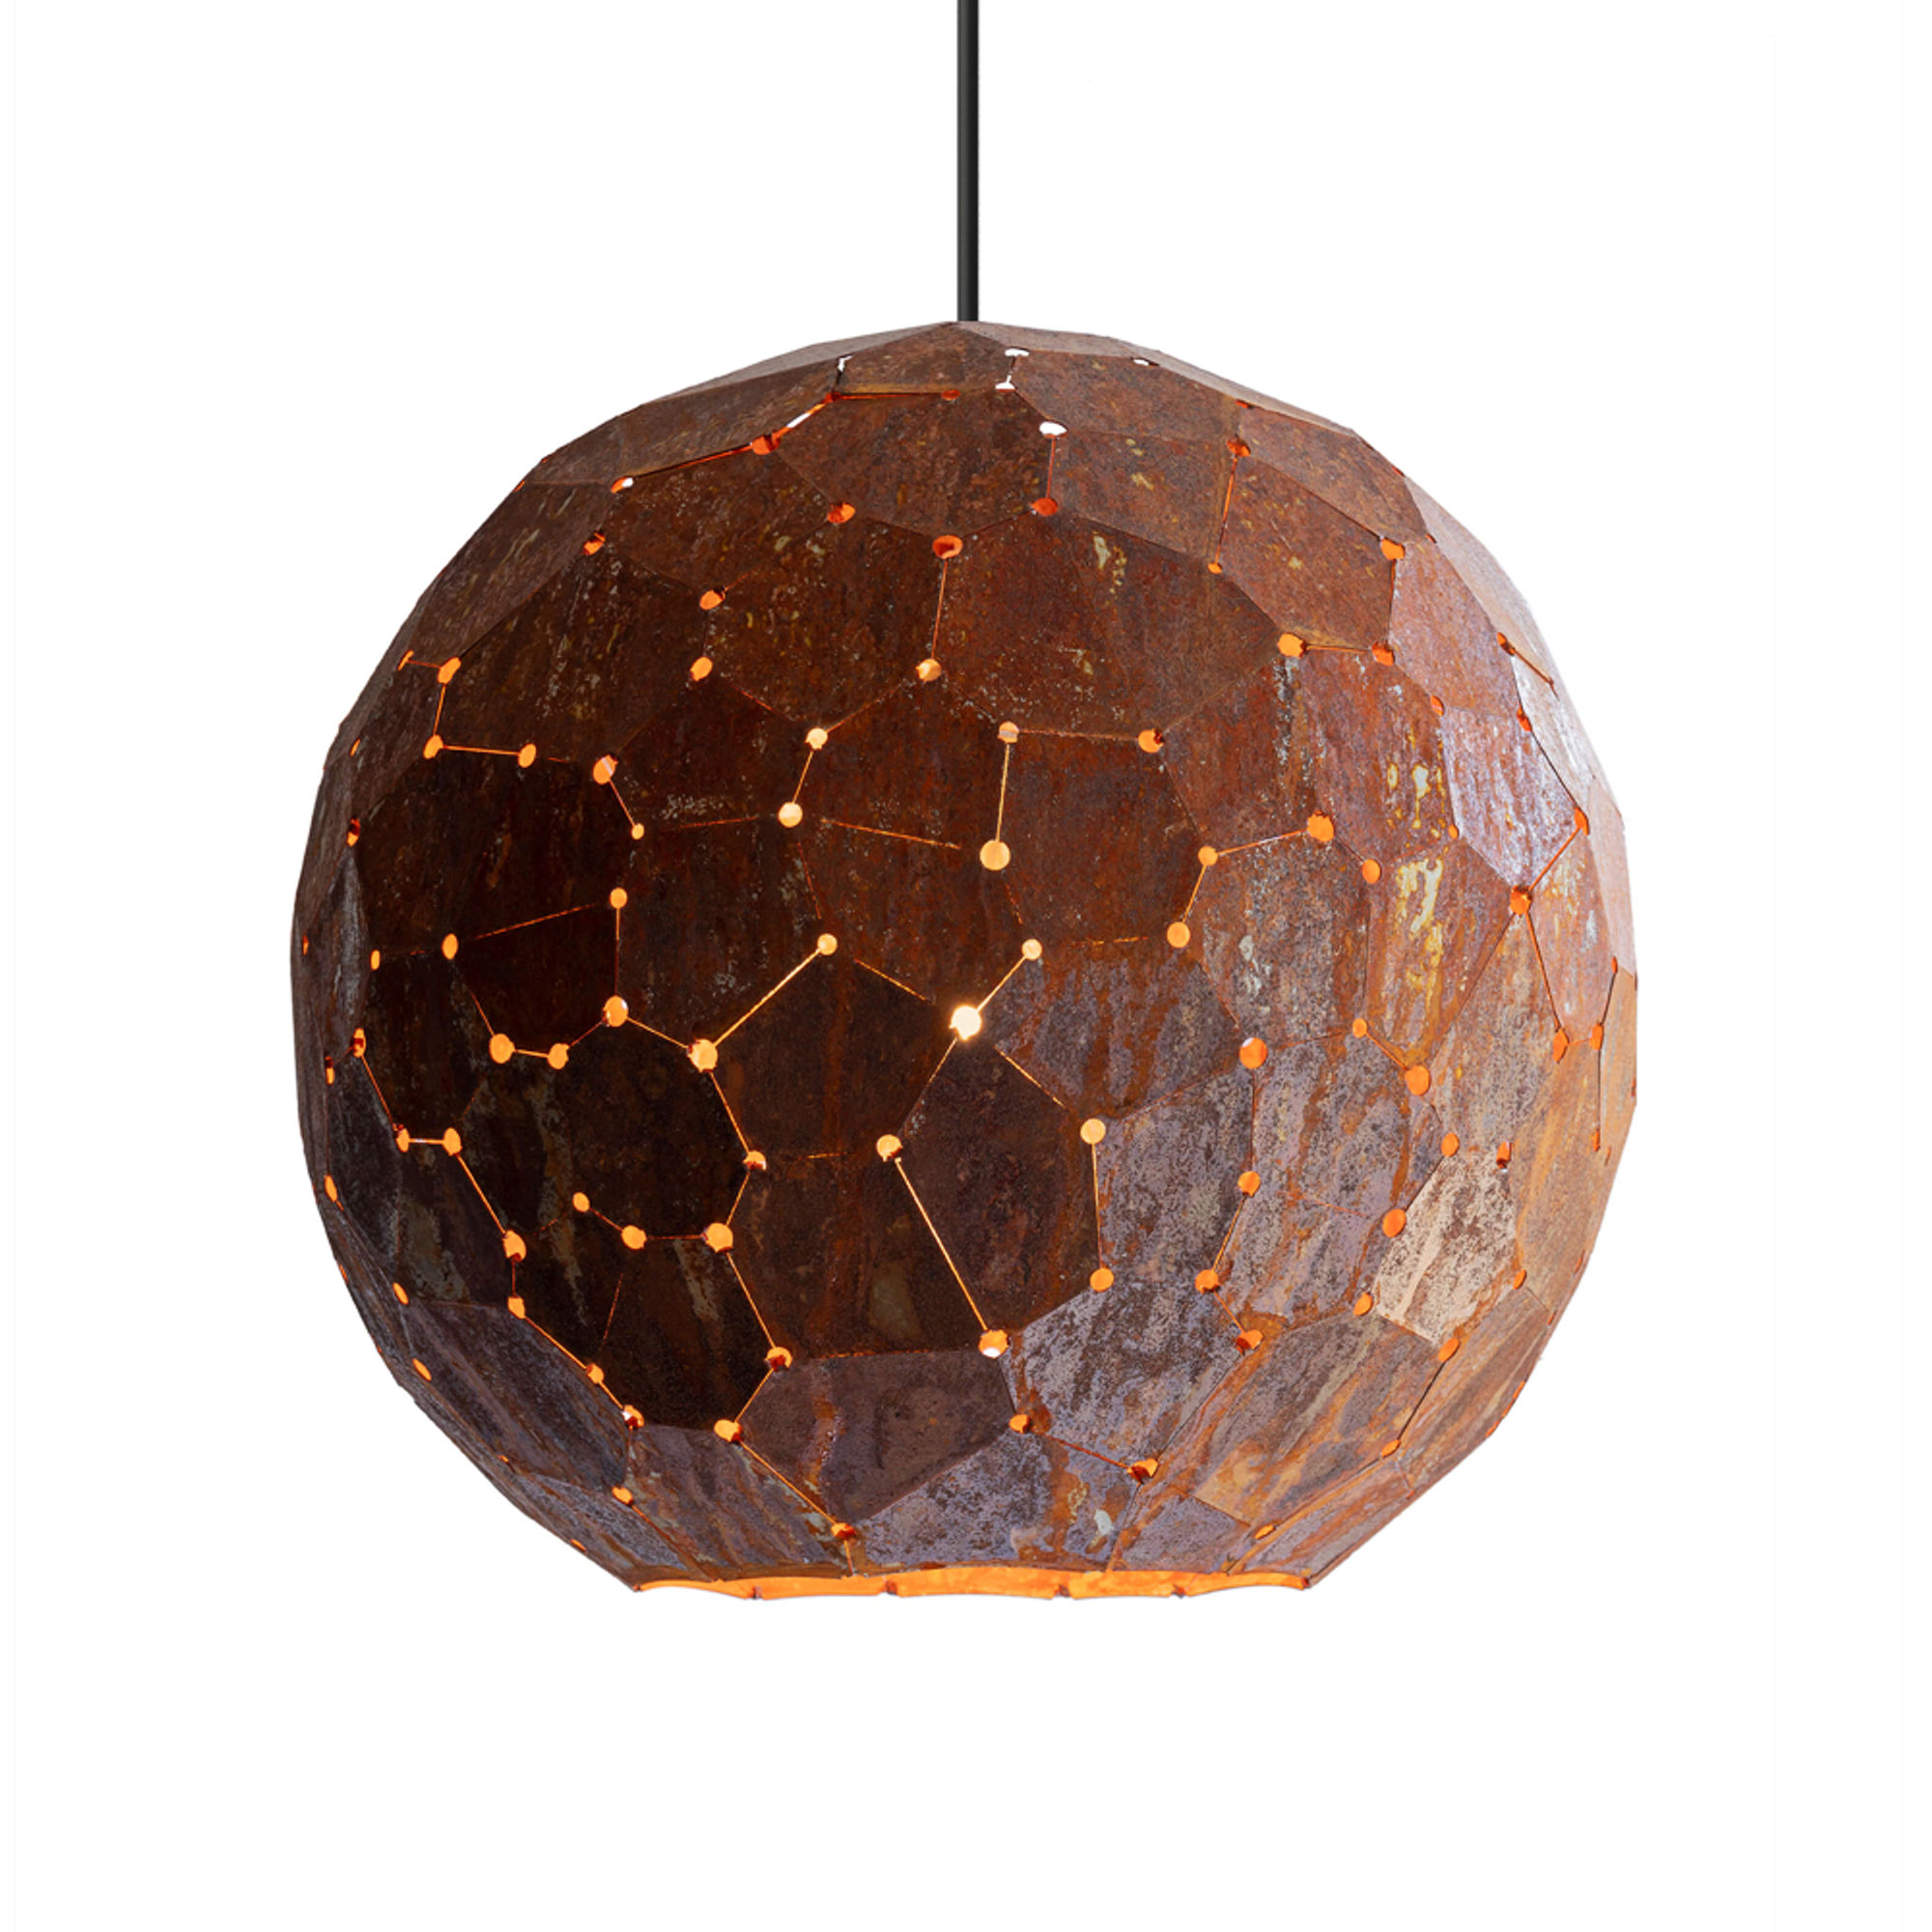 The StarDust 60 Pendant by By Marc de Groot 0